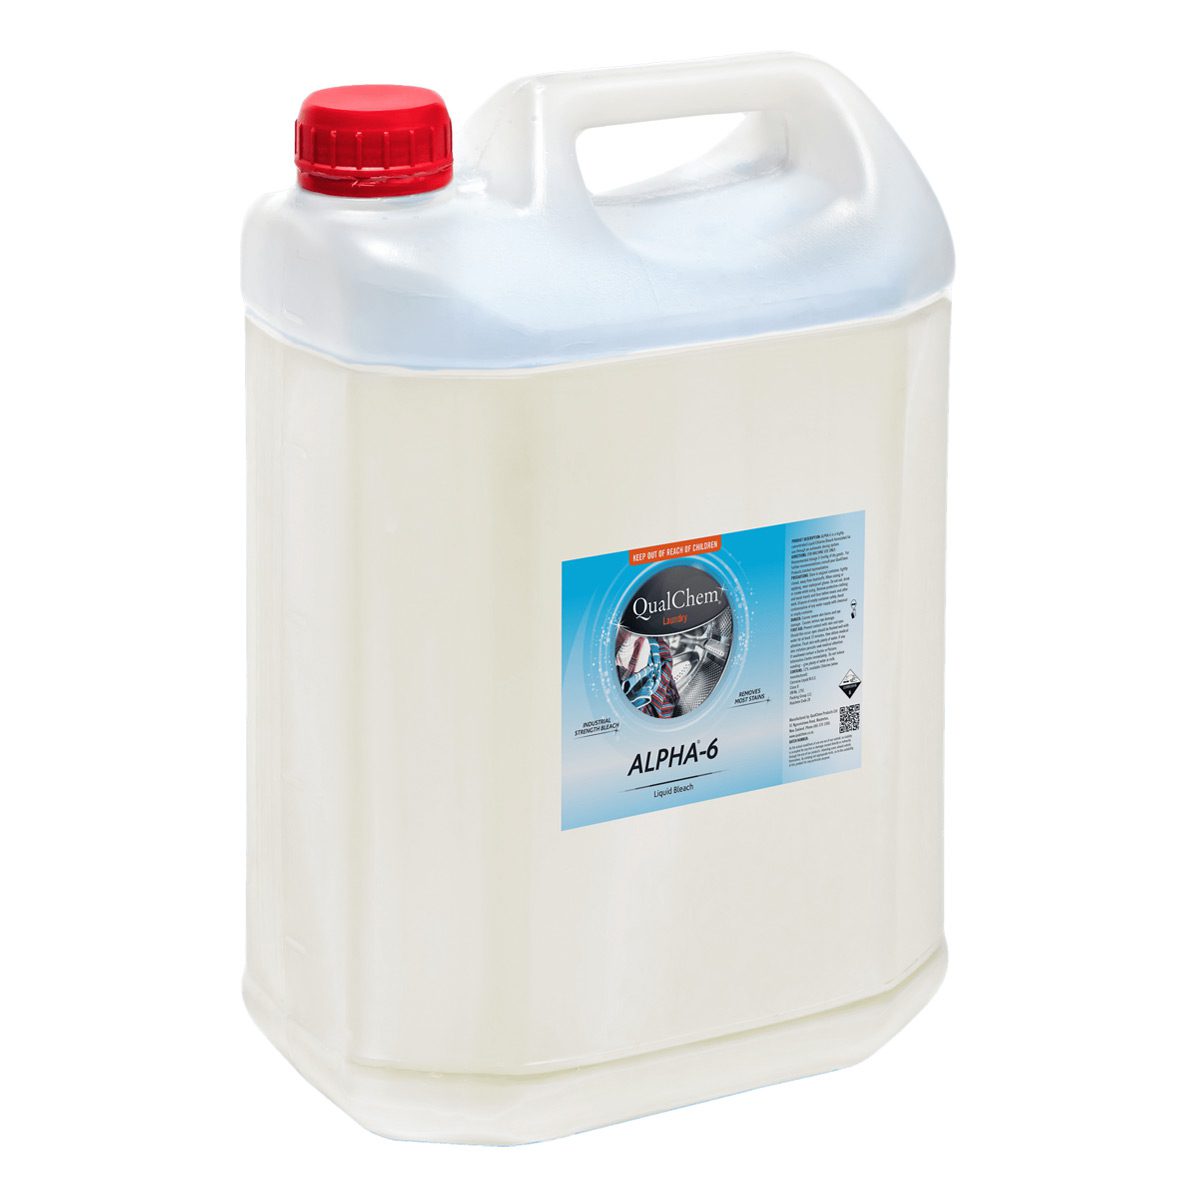 cleaning-products-laundry-qualchem-alpha-6-hypo -bleach-10L-litre-highly-concentrated-liquid-chlorine-bleach-formulated-for-use-through-an-automatic-dosing-system-vjs-distributors-AL610